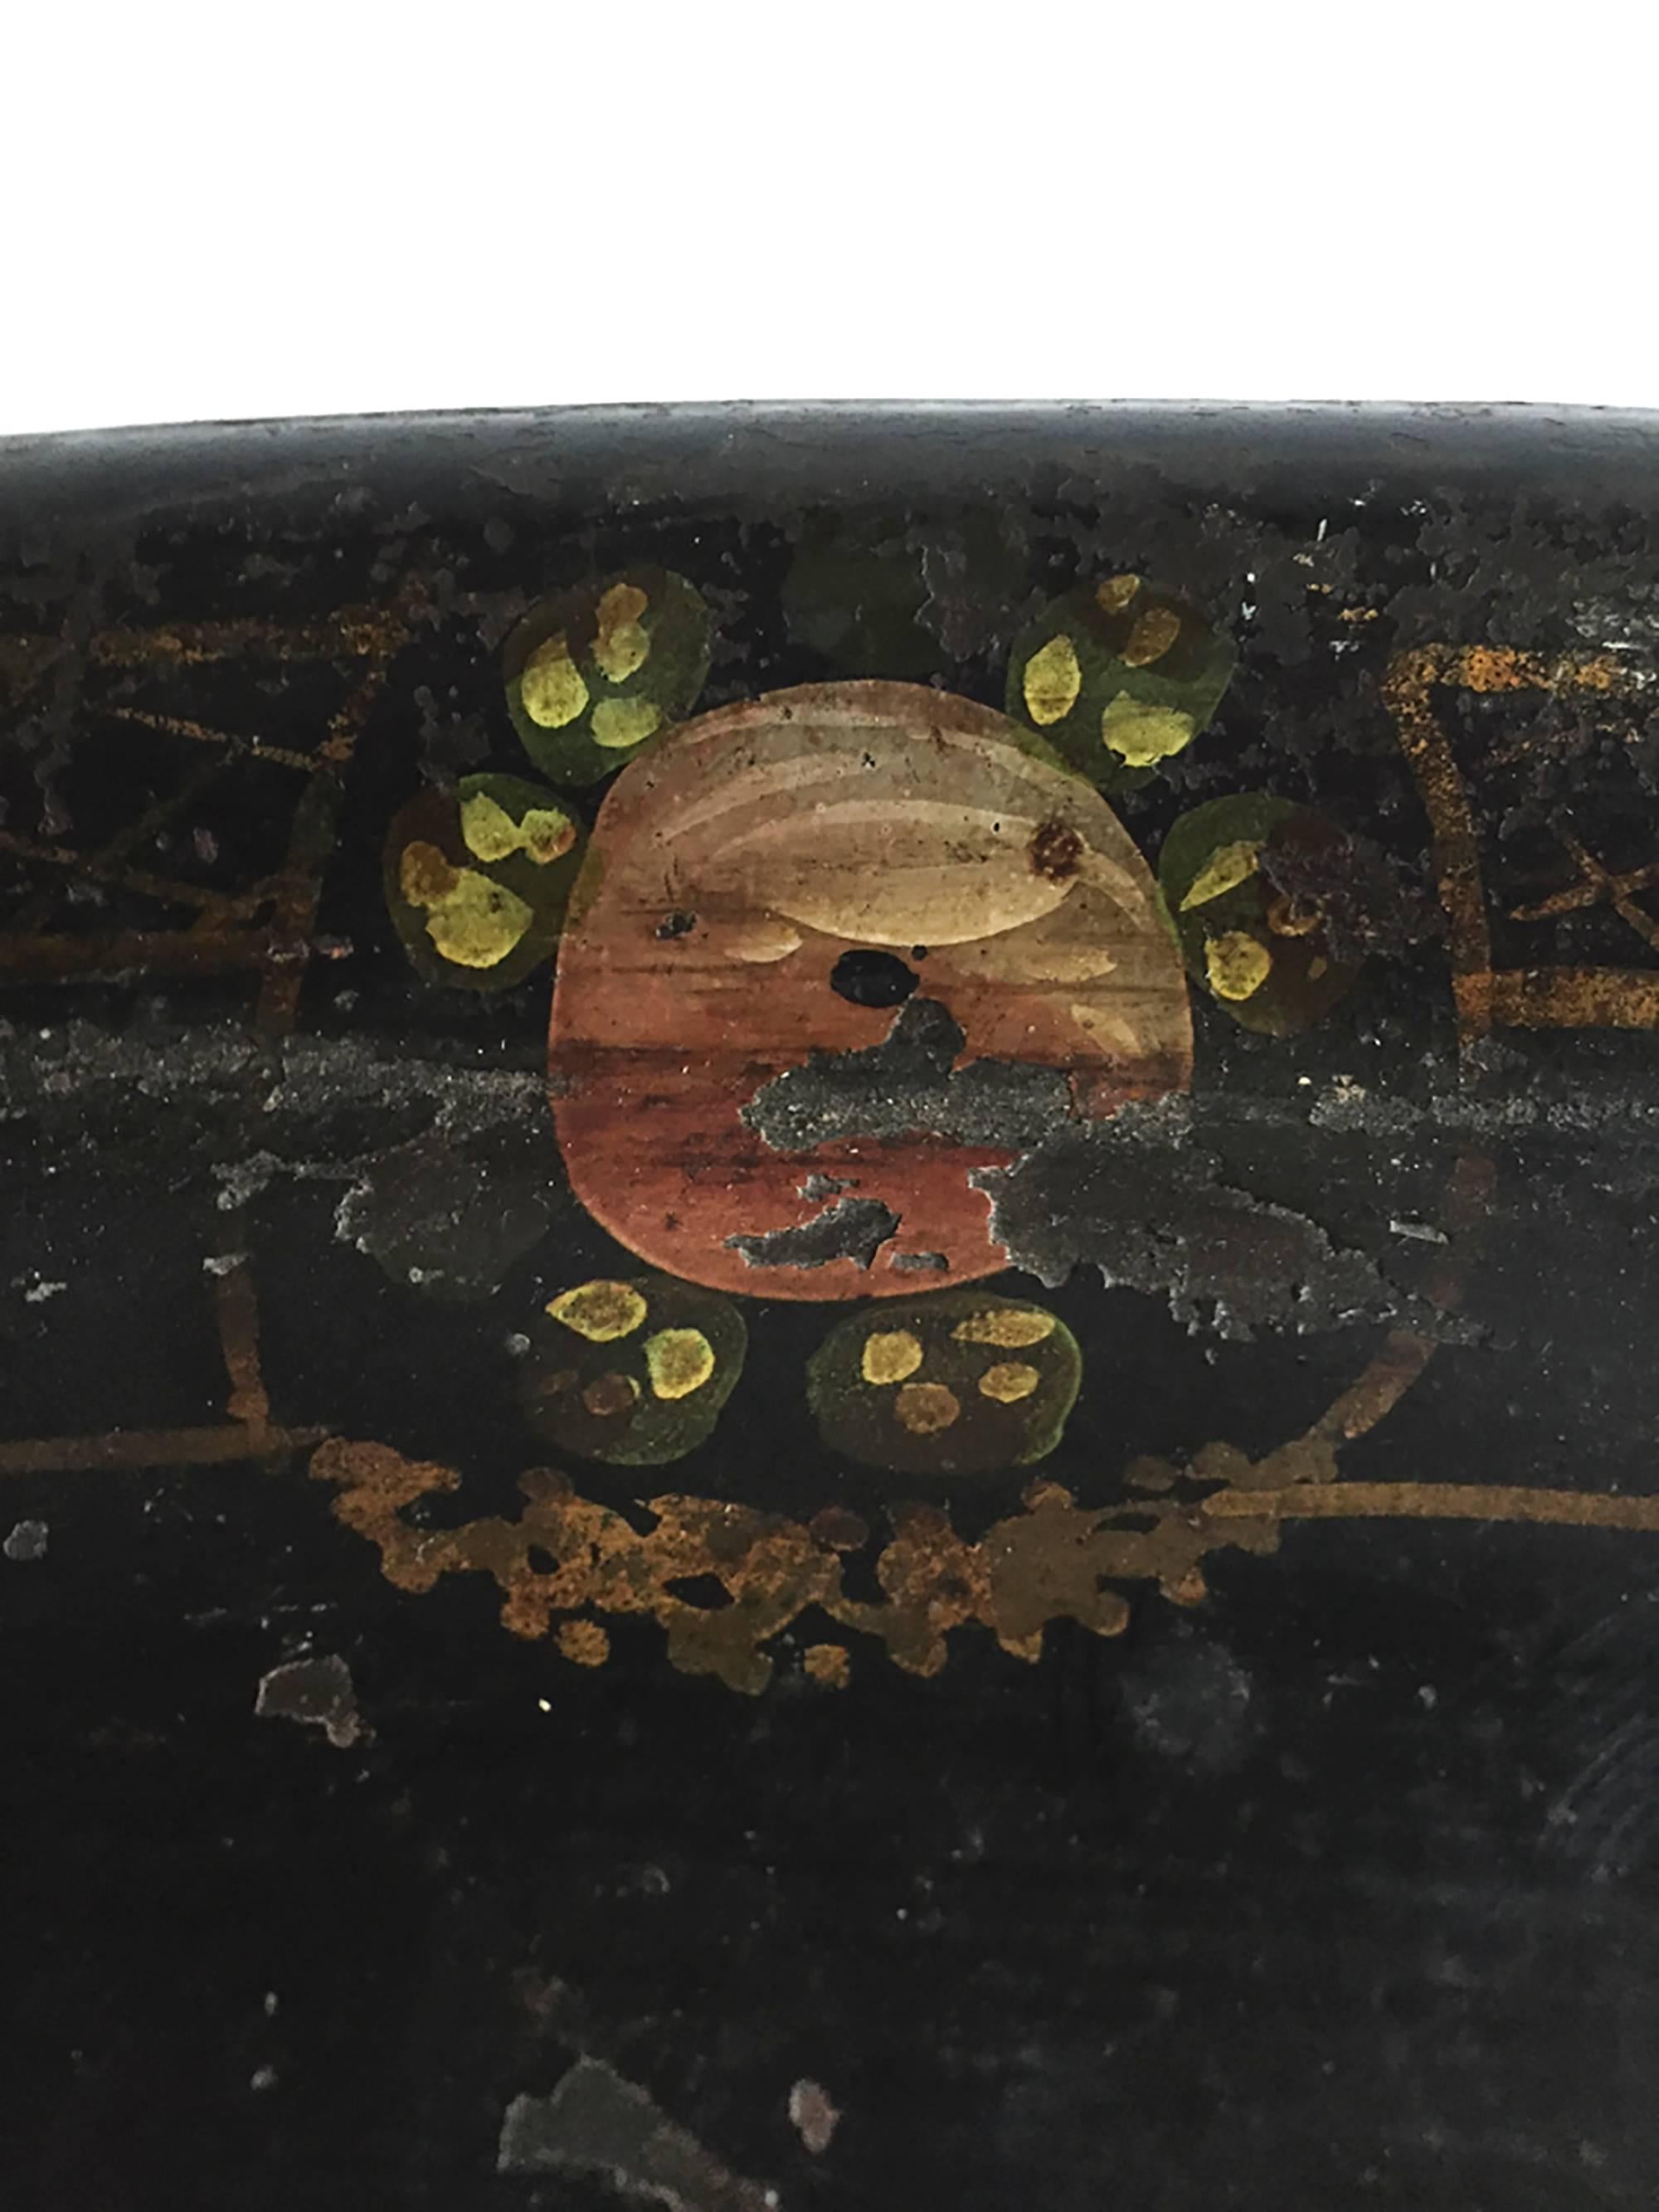 Hand-painted metal fruit tray from Belgium, circa 1900, with gold painted lattice motif and fruit imagery.